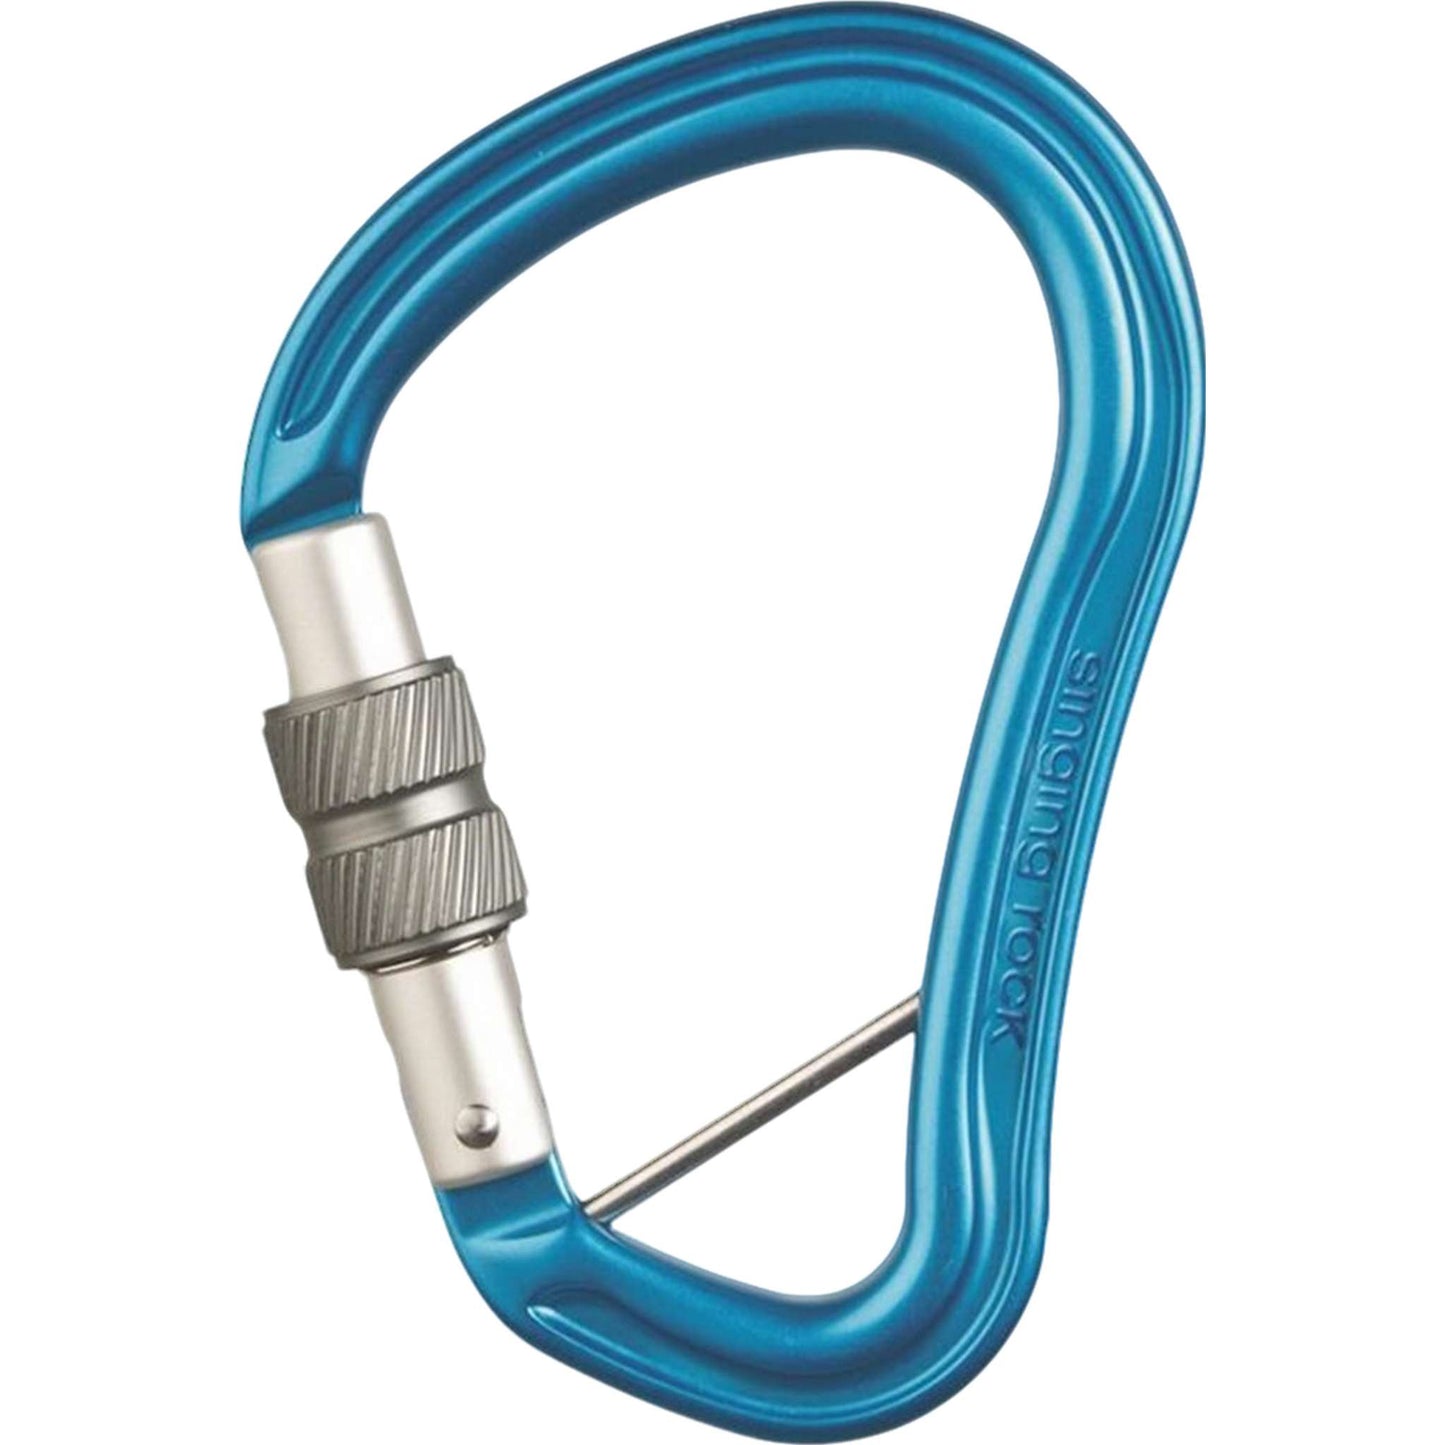 Hector BC Screw HMS Carabiner - Pear-Shaped, High-Strength for Secure Anchoring & Belaying